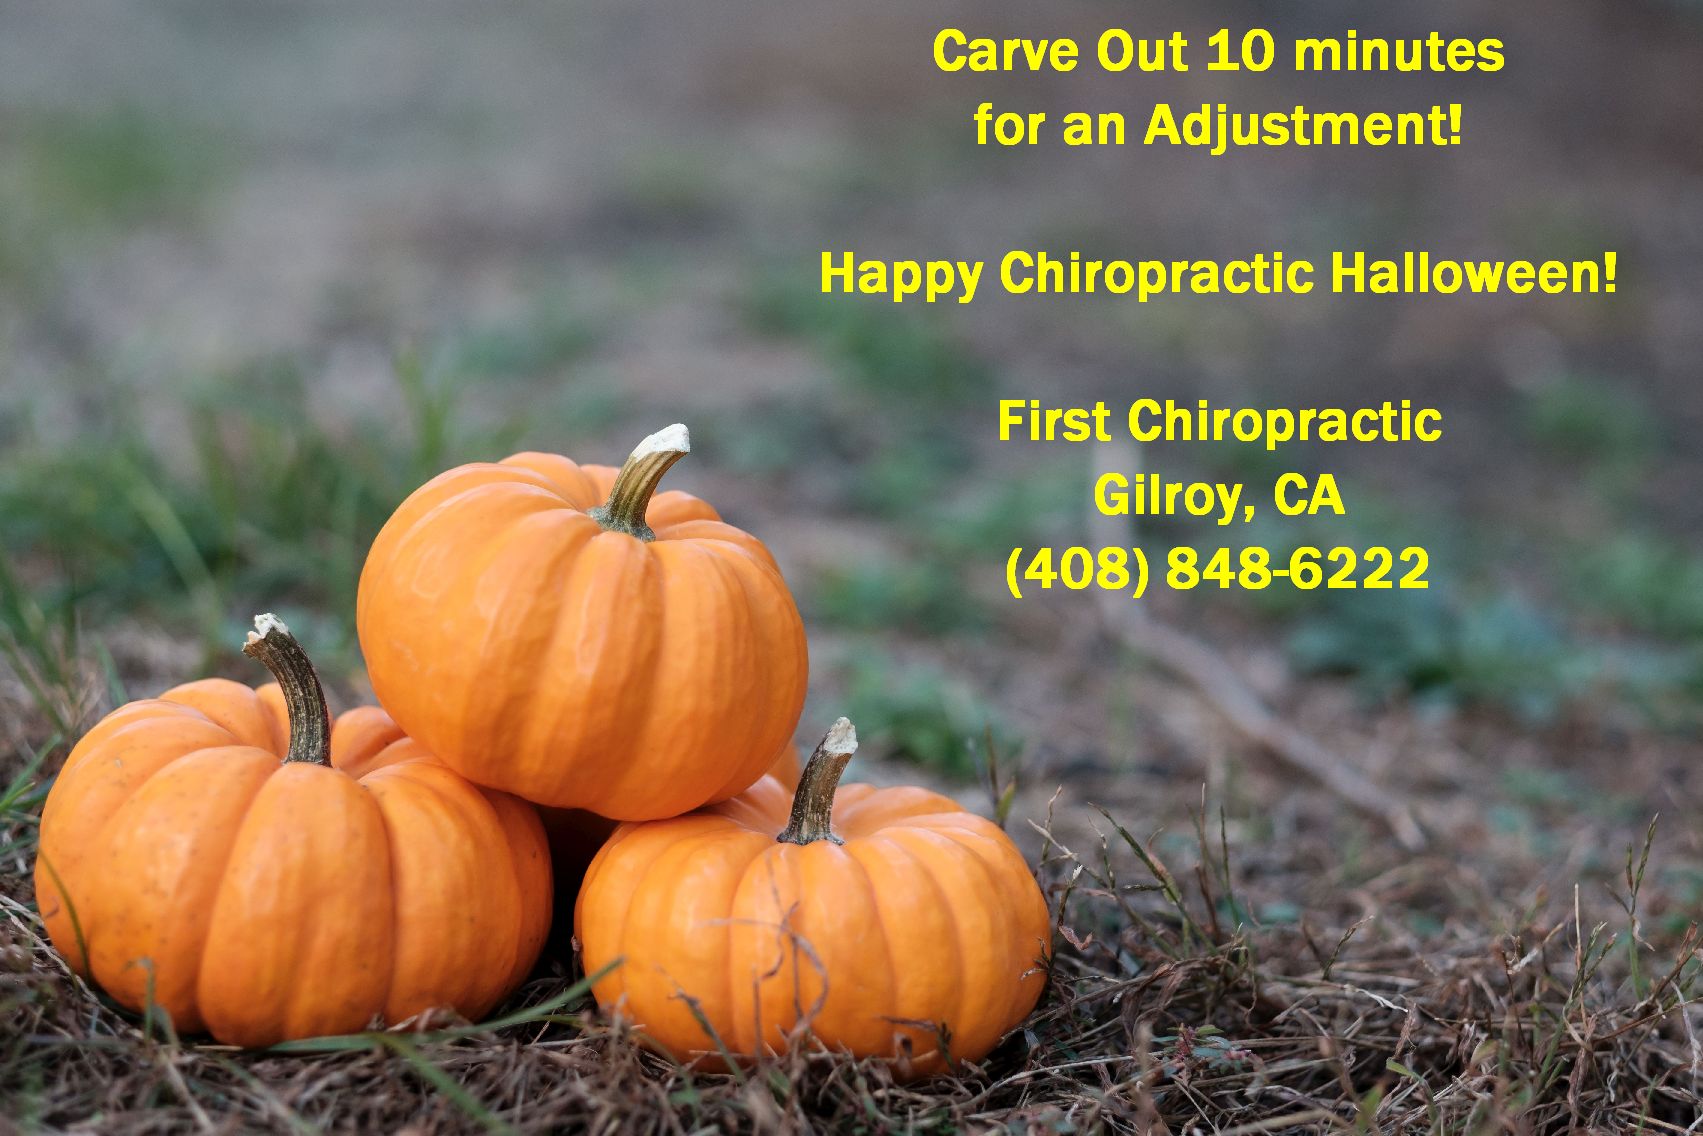 3 Pumpkins + caption - Chiropractic Halloween - Carve Out 10 Minutes for an Adjustment